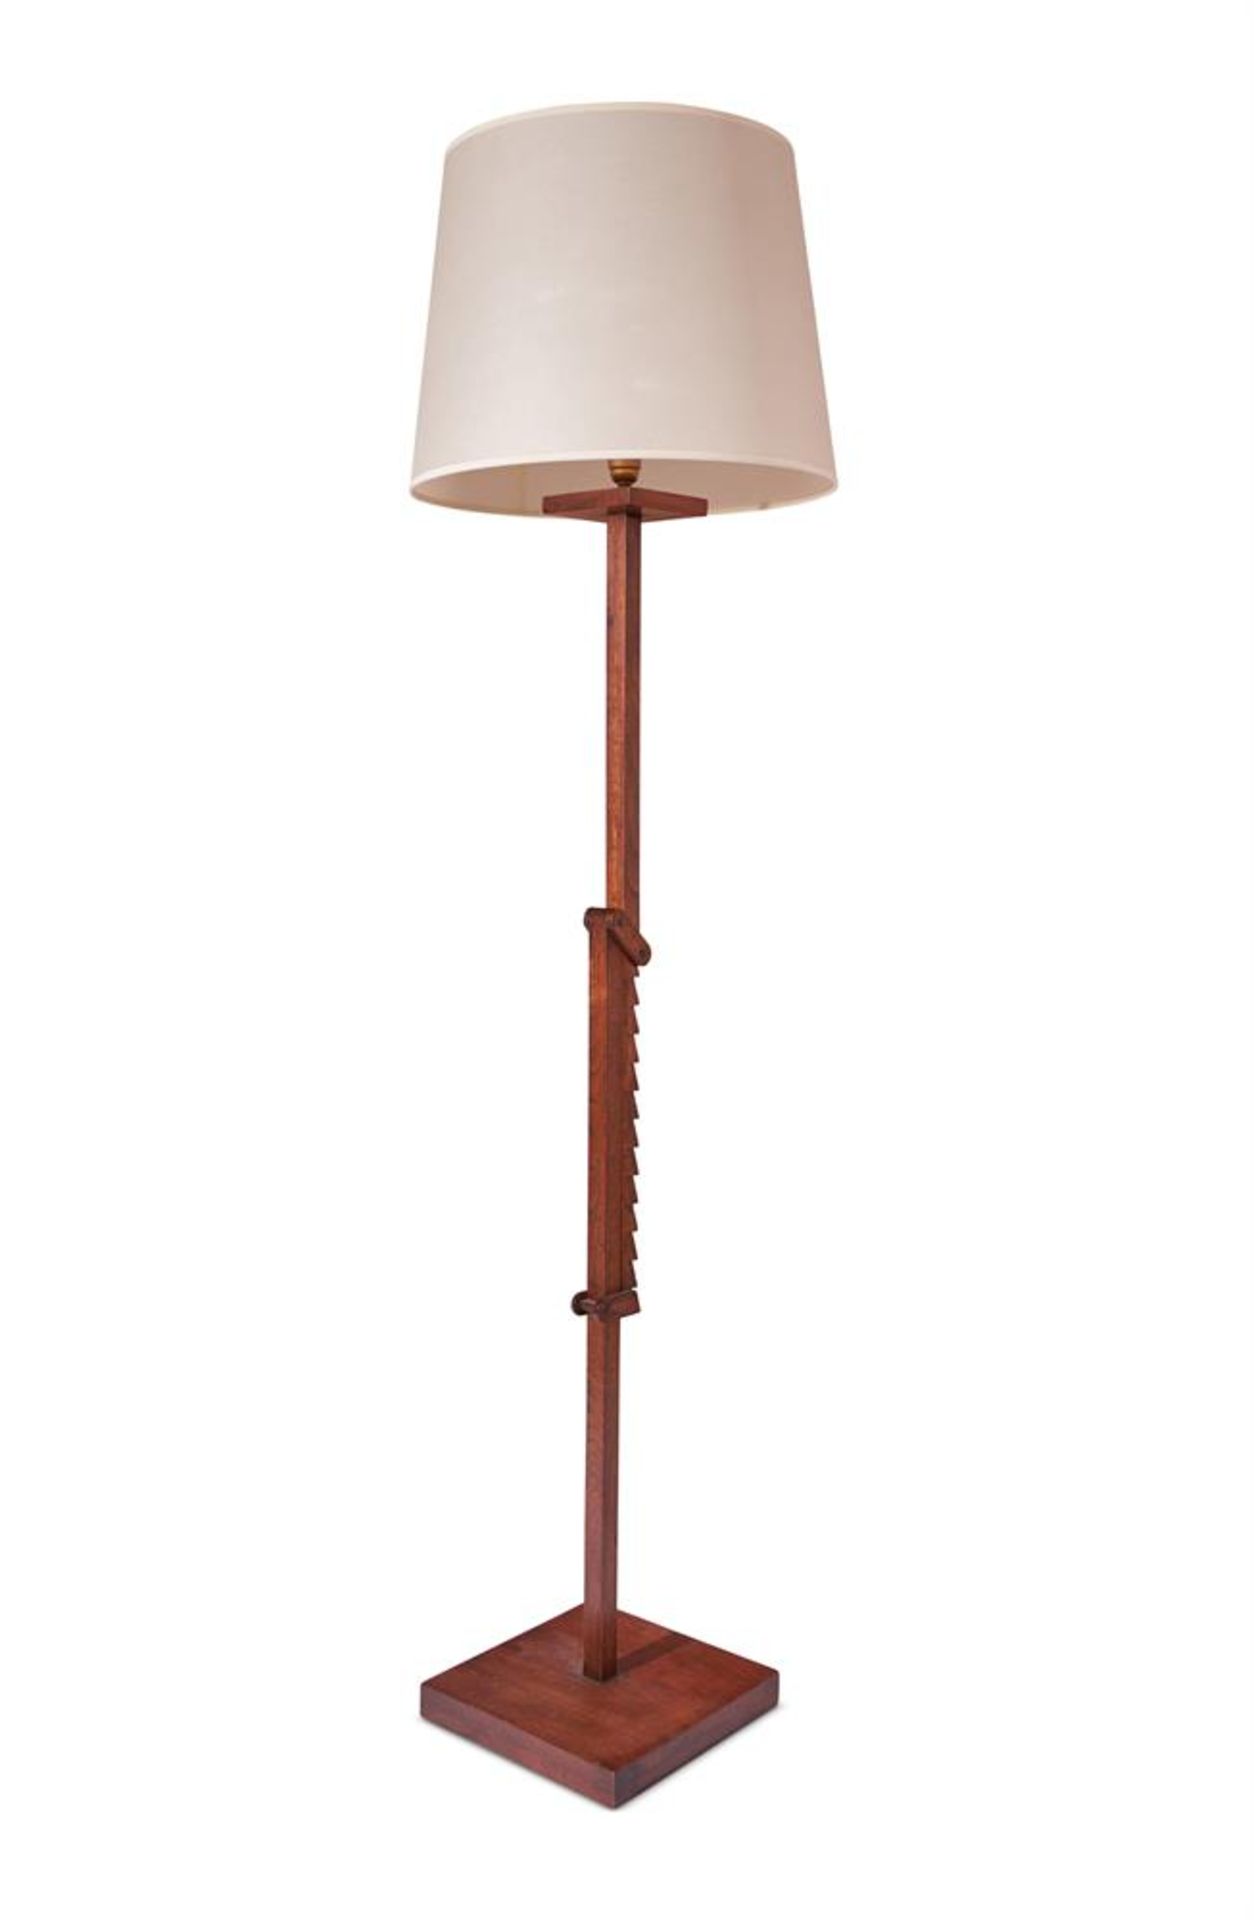 A WALNUT AND OAK ADJUSTABLE FLOOR LAMP, FRENCH